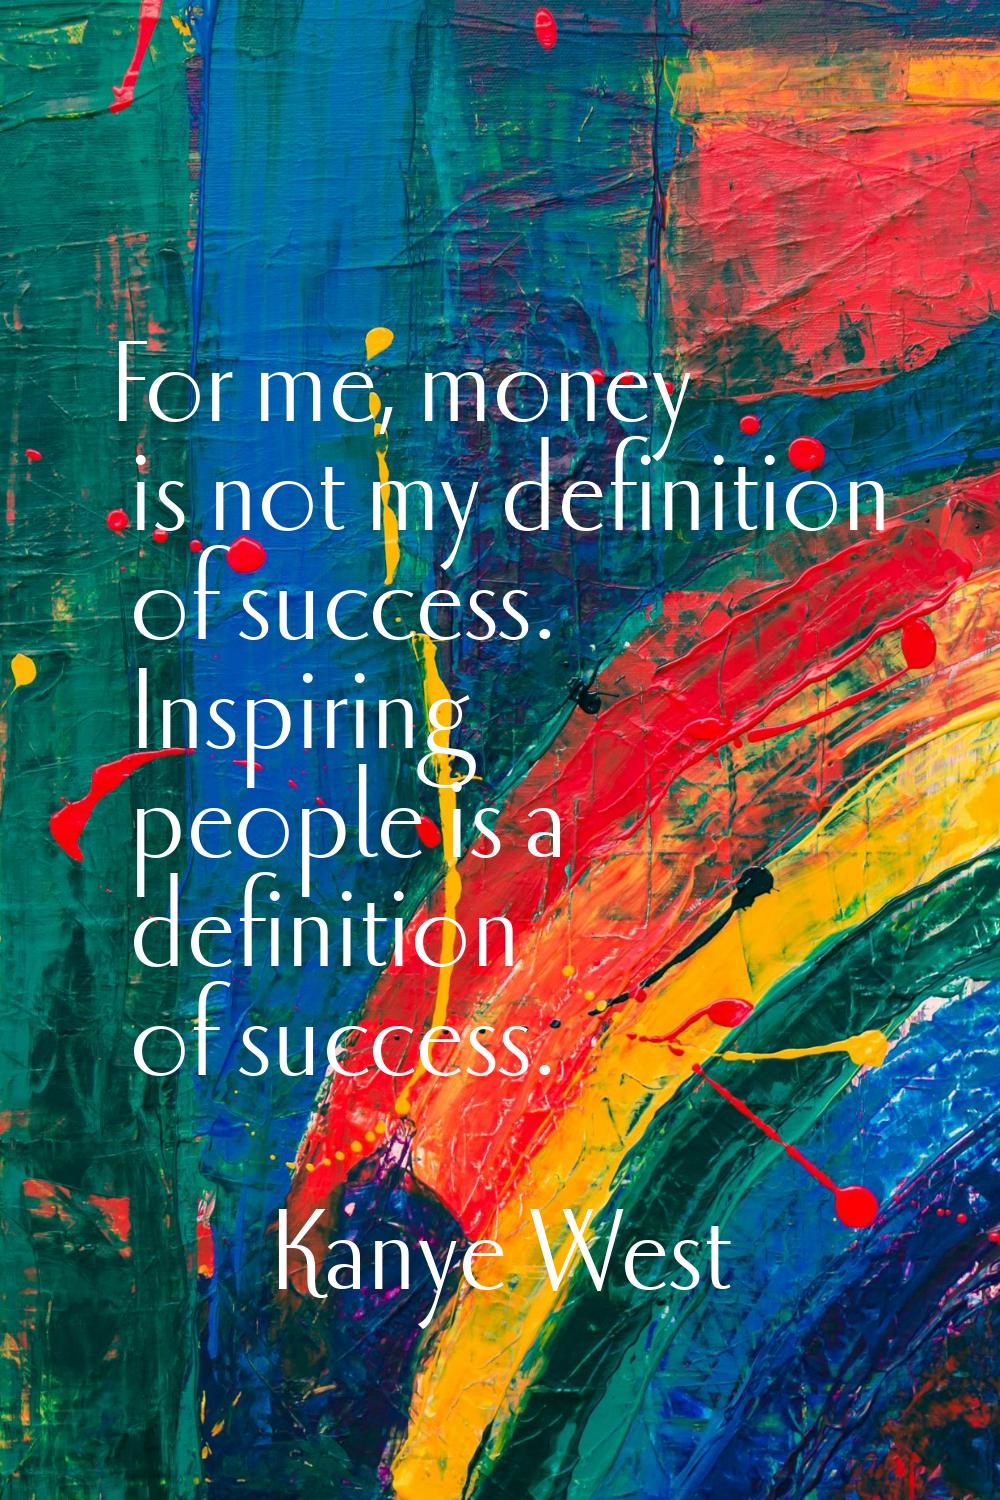 For me, money is not my definition of success. Inspiring people is a definition of success.